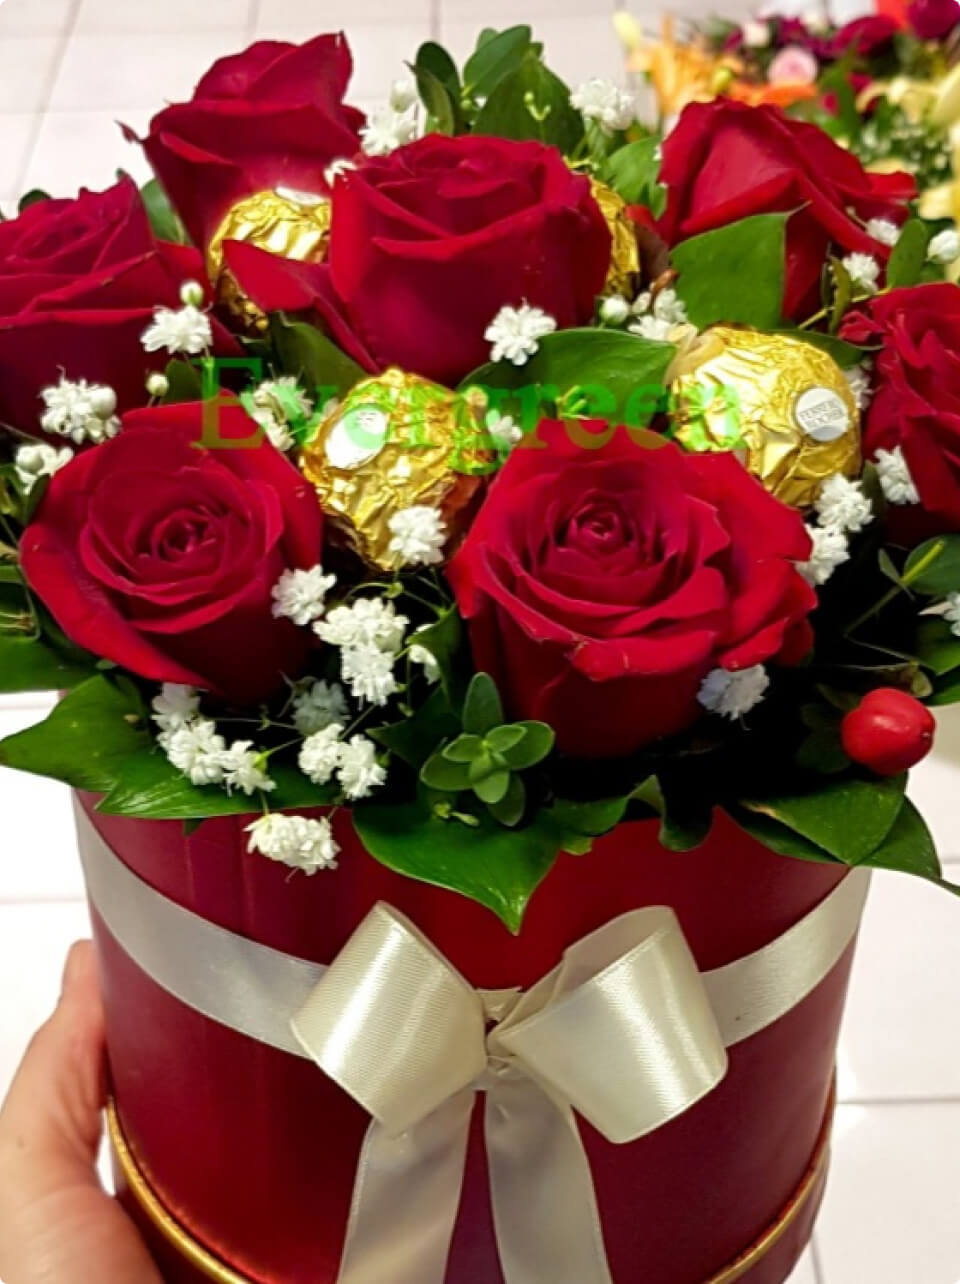 bouquet-red-roses-decoration-flowers